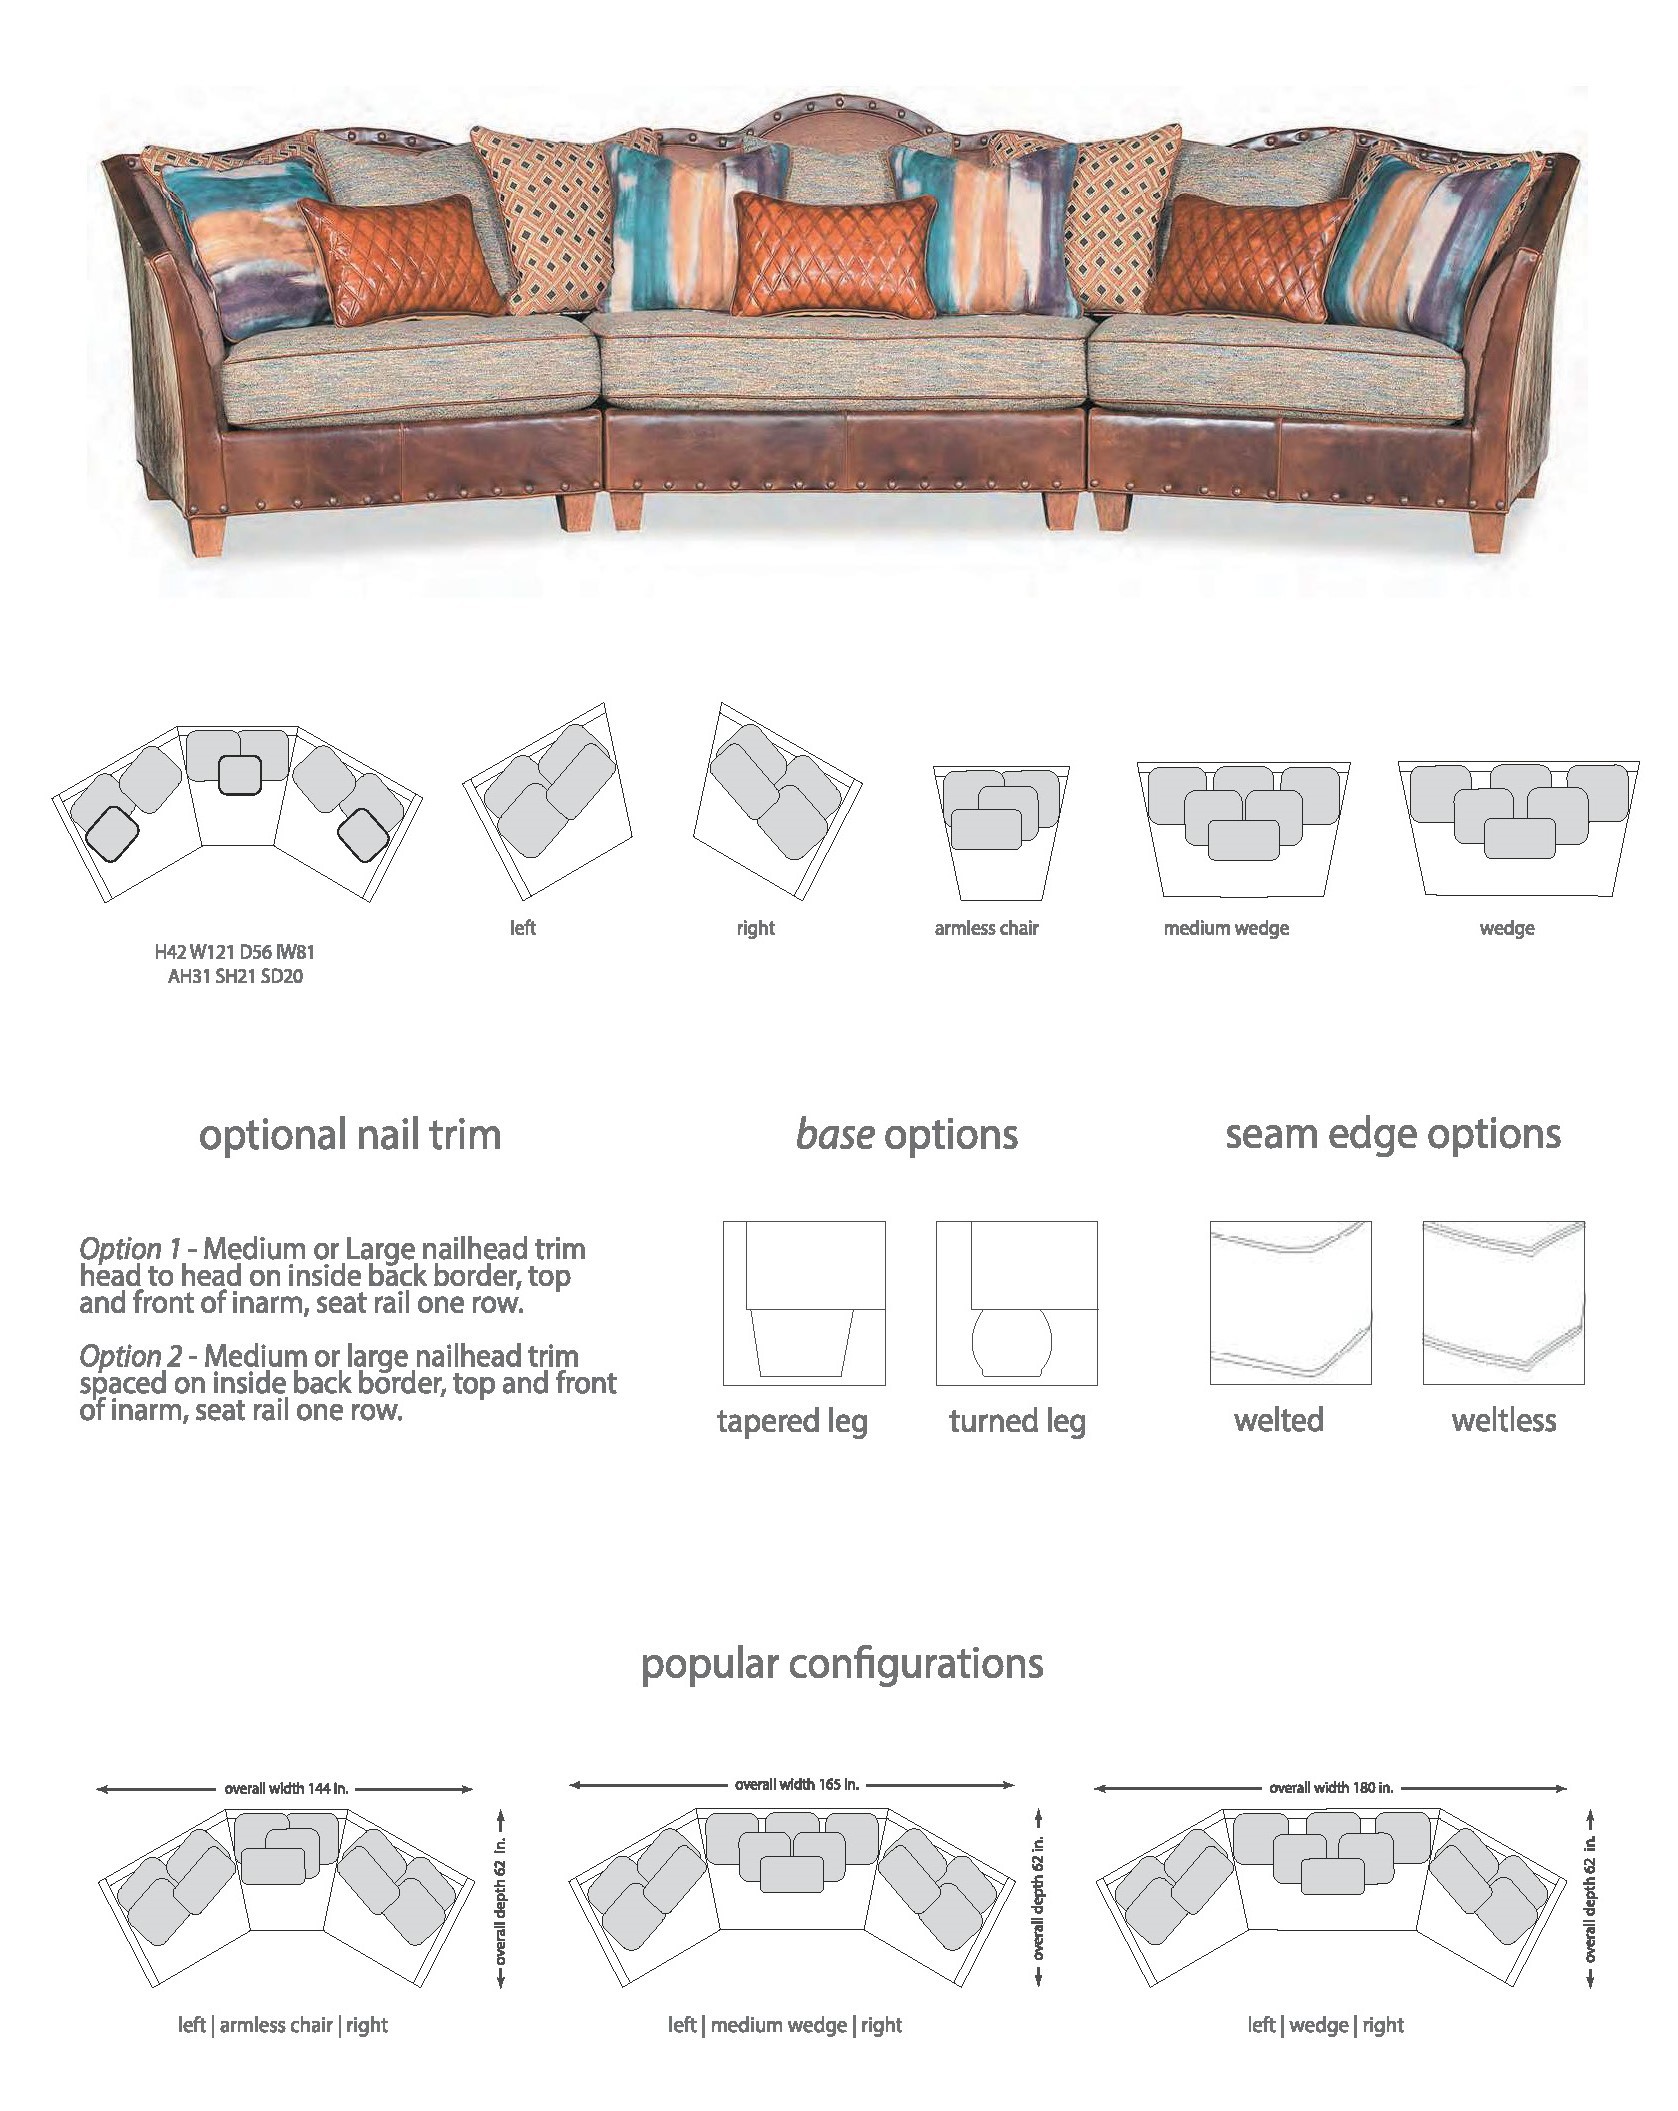 845 Sofa Chair Leather Fabric Sectional, Leather And Fabric Sectional Sofa